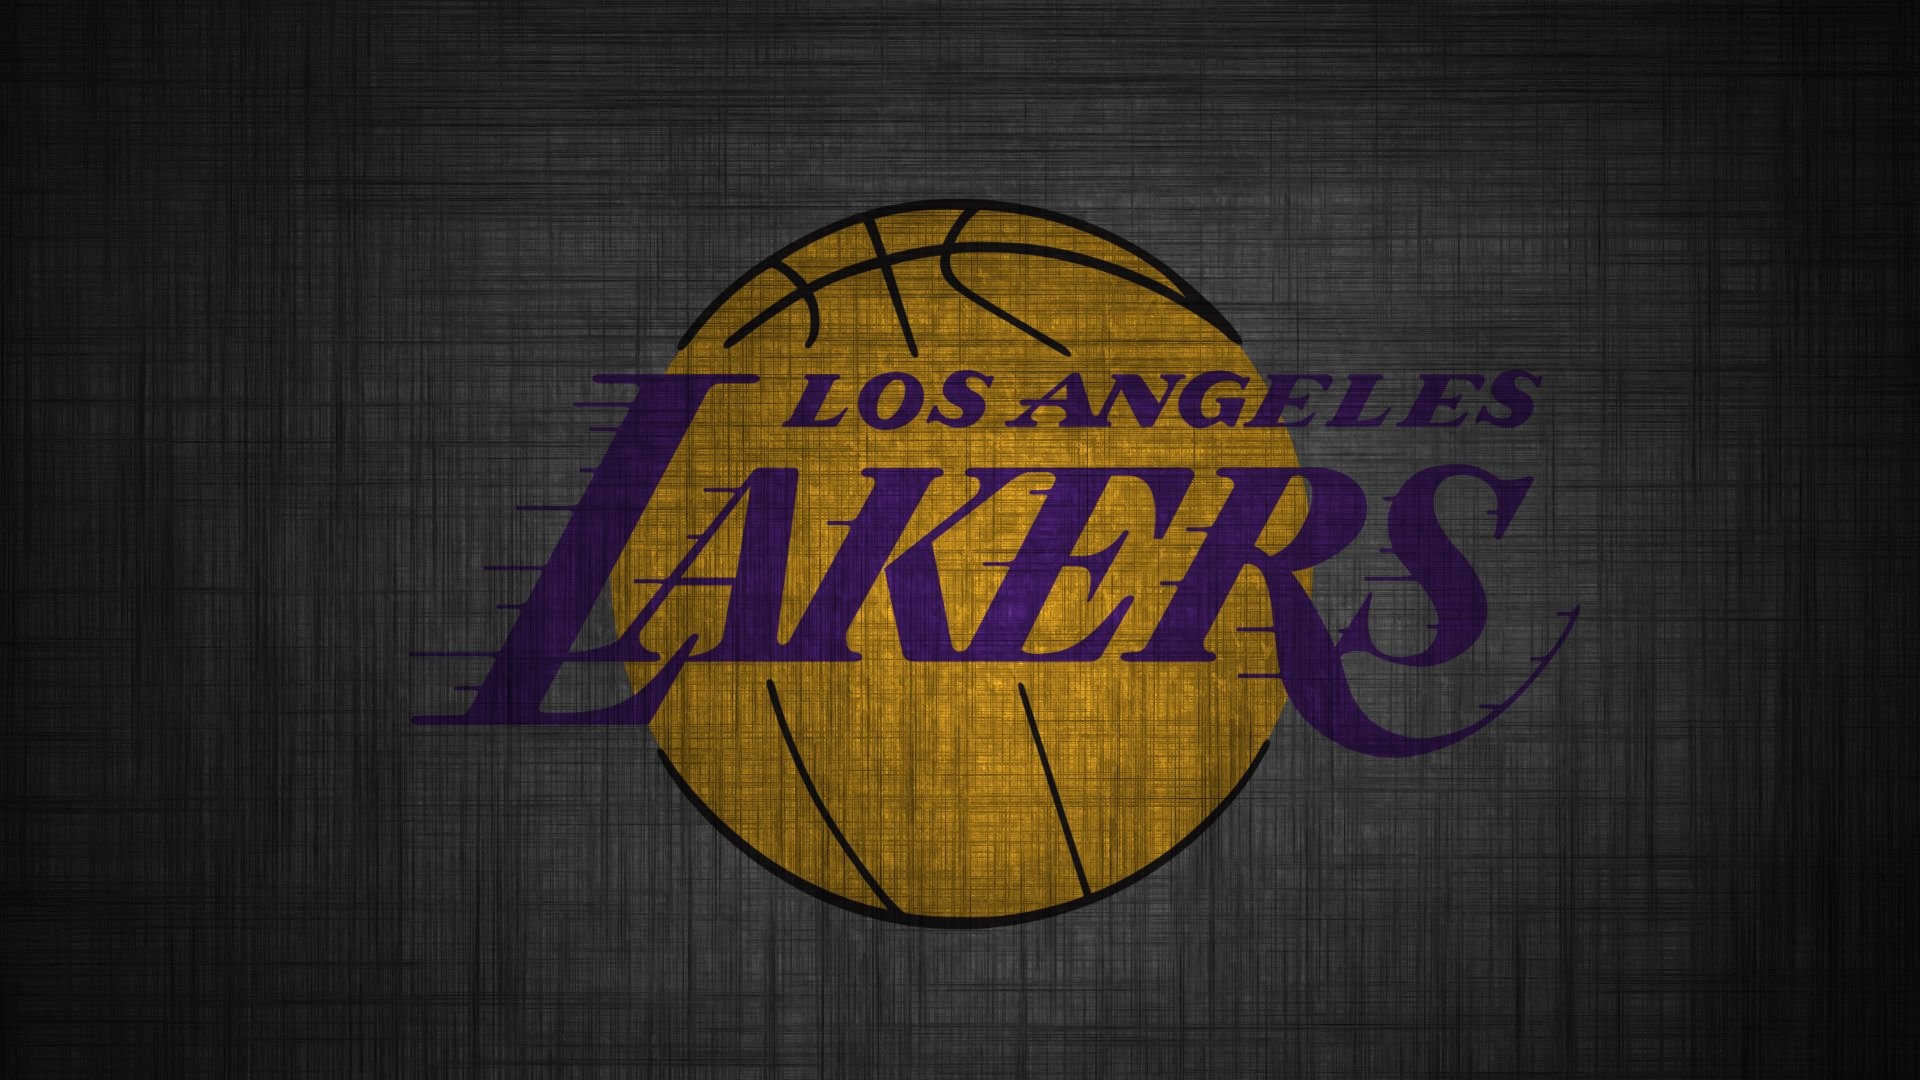 1920x1080 Lakers Wallpaper Images on | HD Wallpapers | Pinterest | Hd wallpaper and  Wallpaper